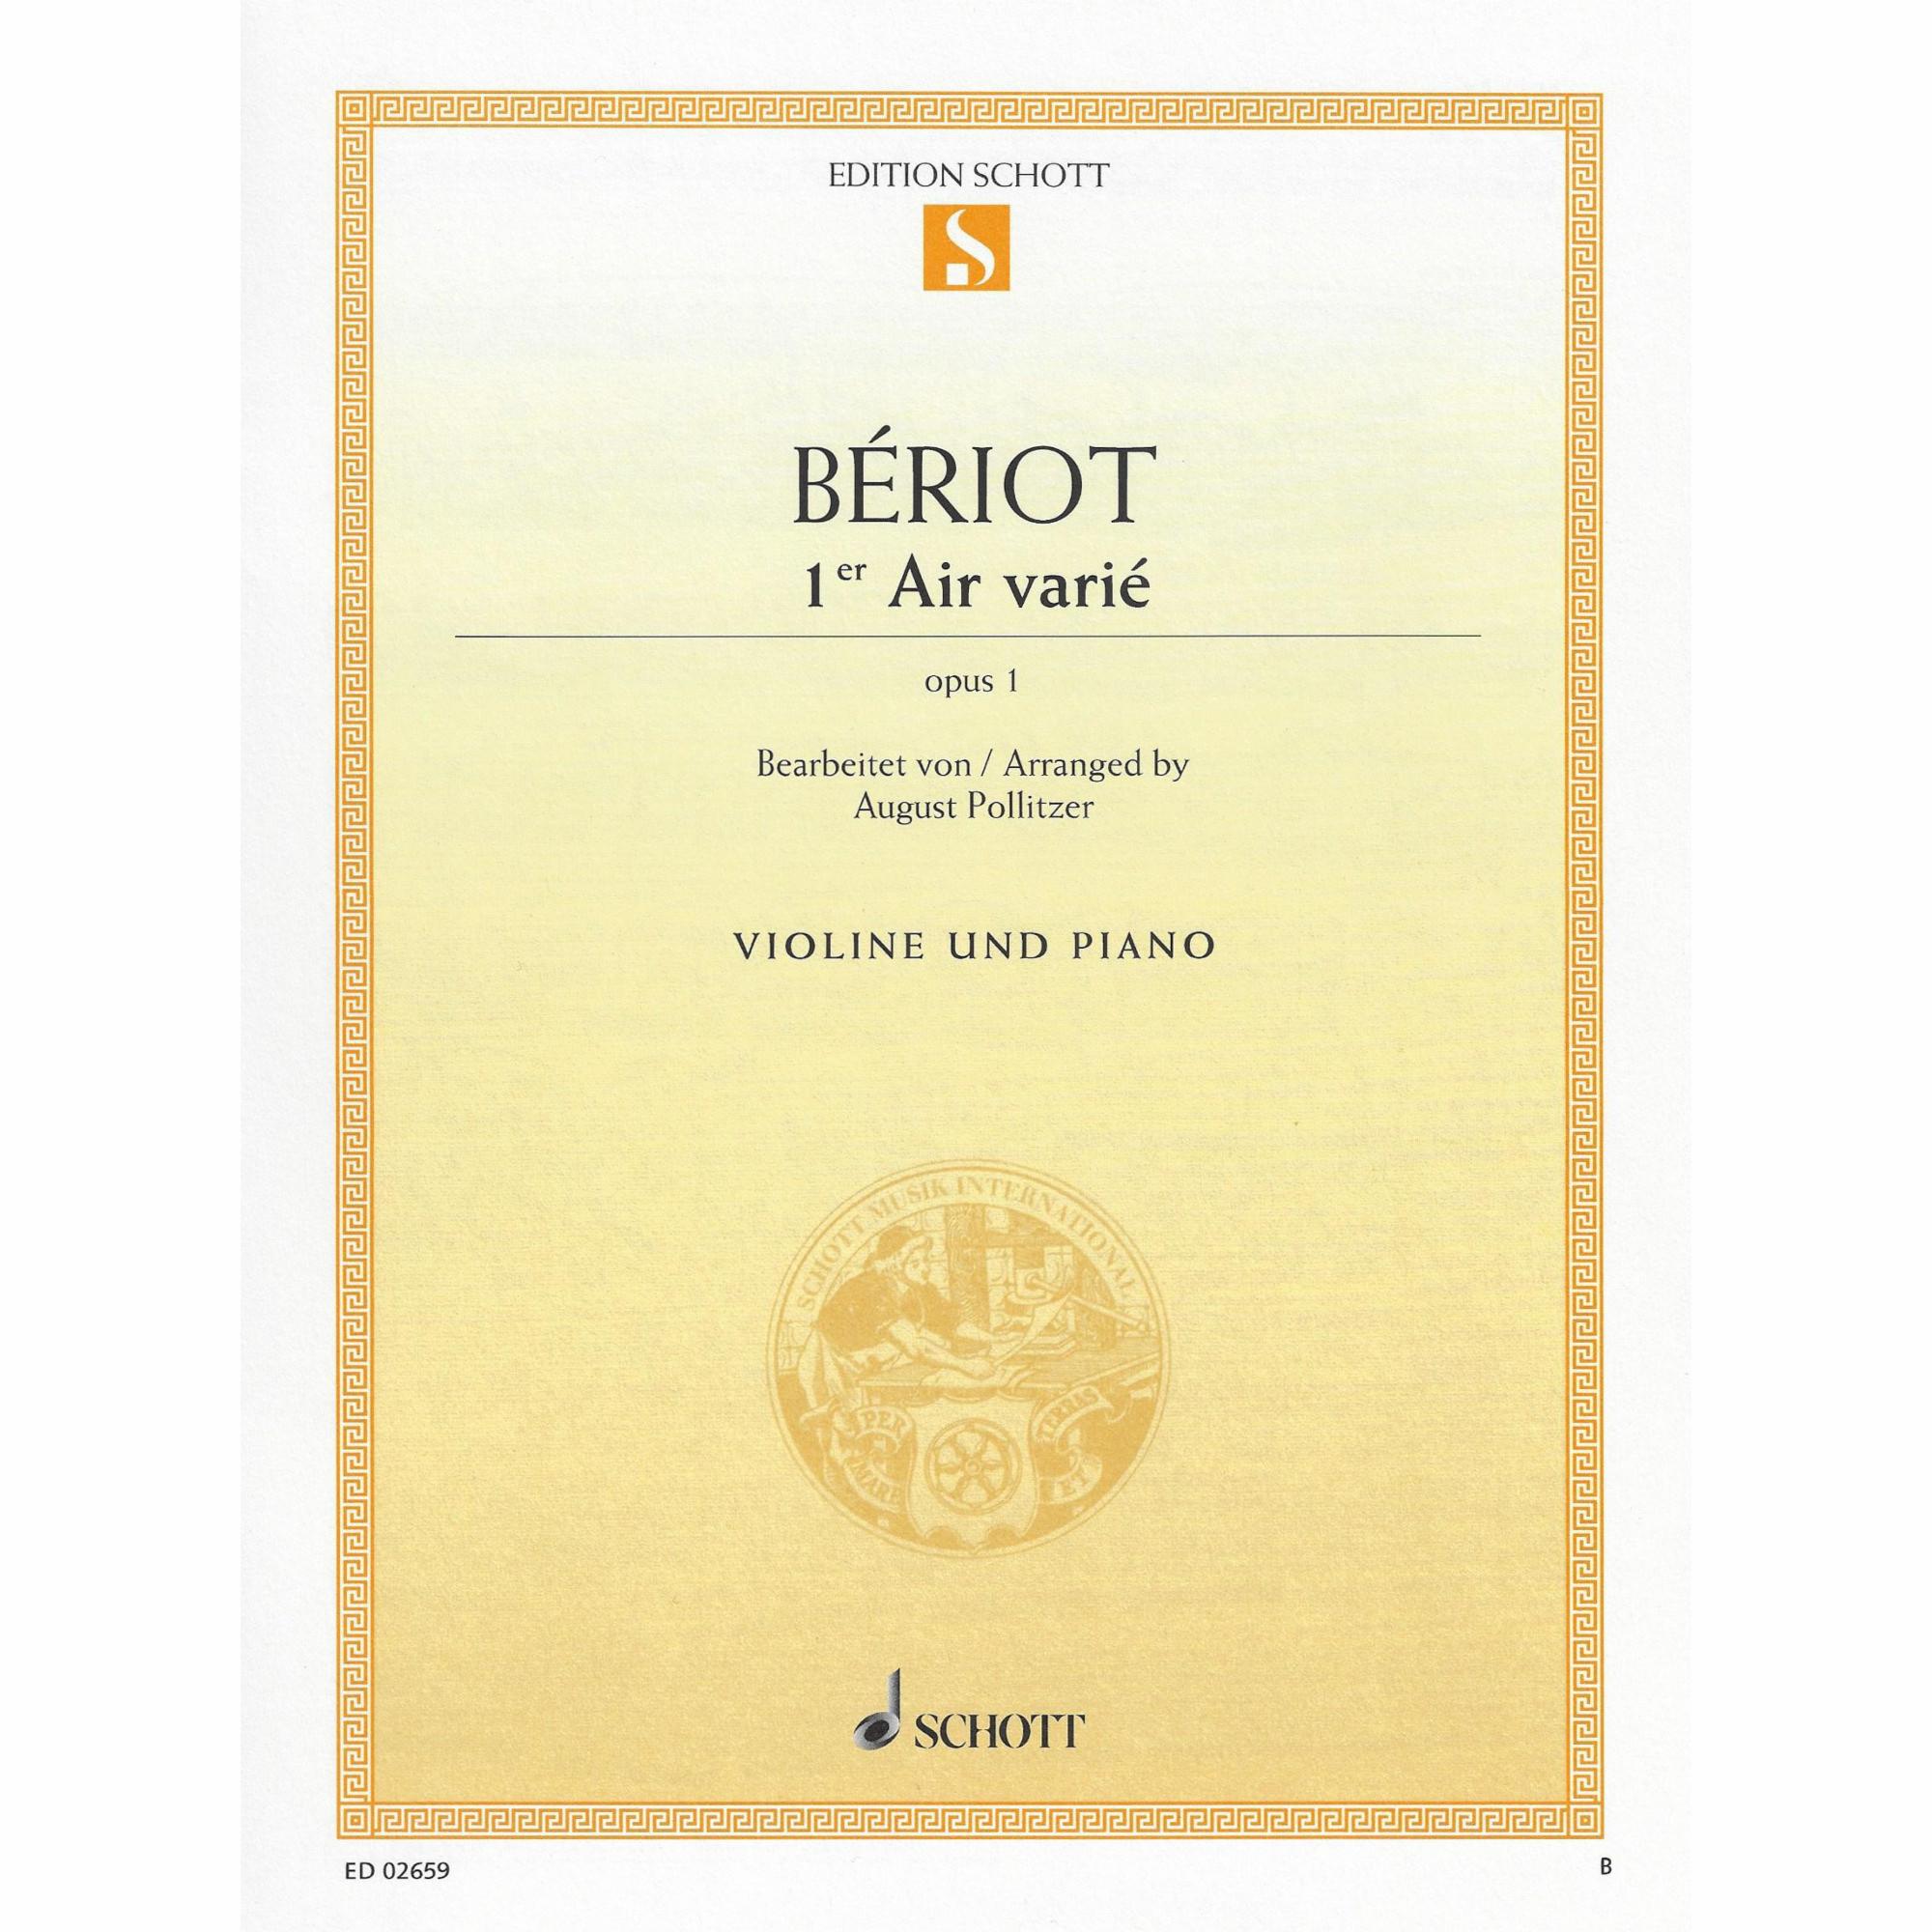 Beriot -- Air with Variations No. 1, Op. 1 for Violin and Piano